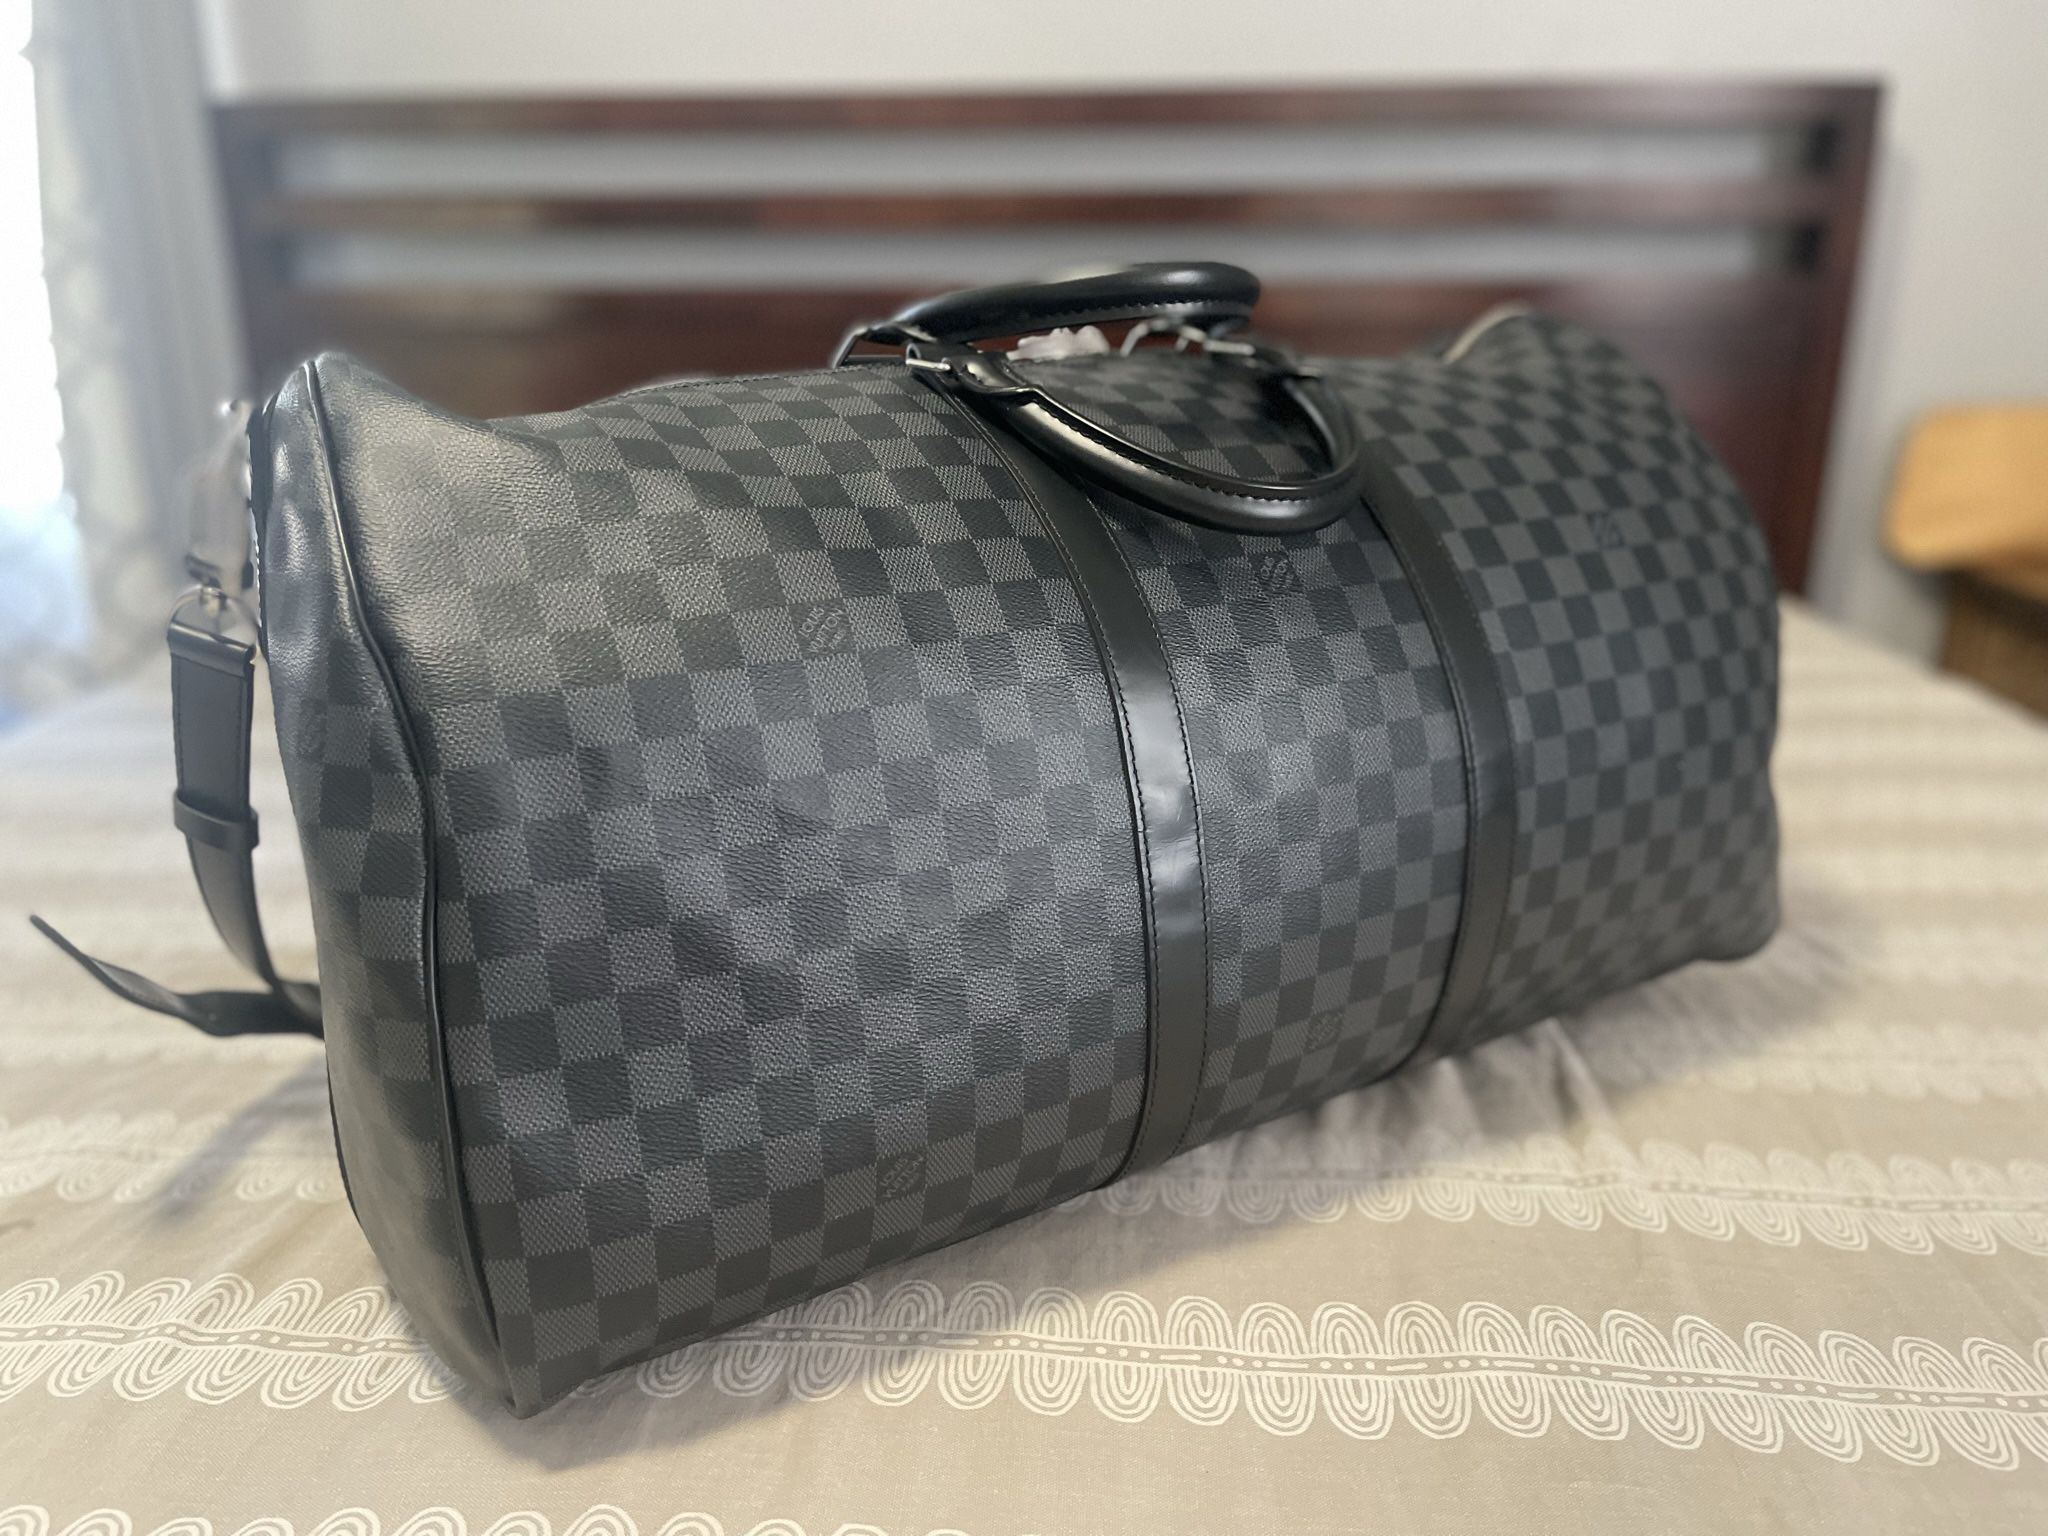 Louis Vuitton Bandouliere Keepall 55 Monogram Eclipse Duffle Bag for Sale  in Hinsdale, IL - OfferUp